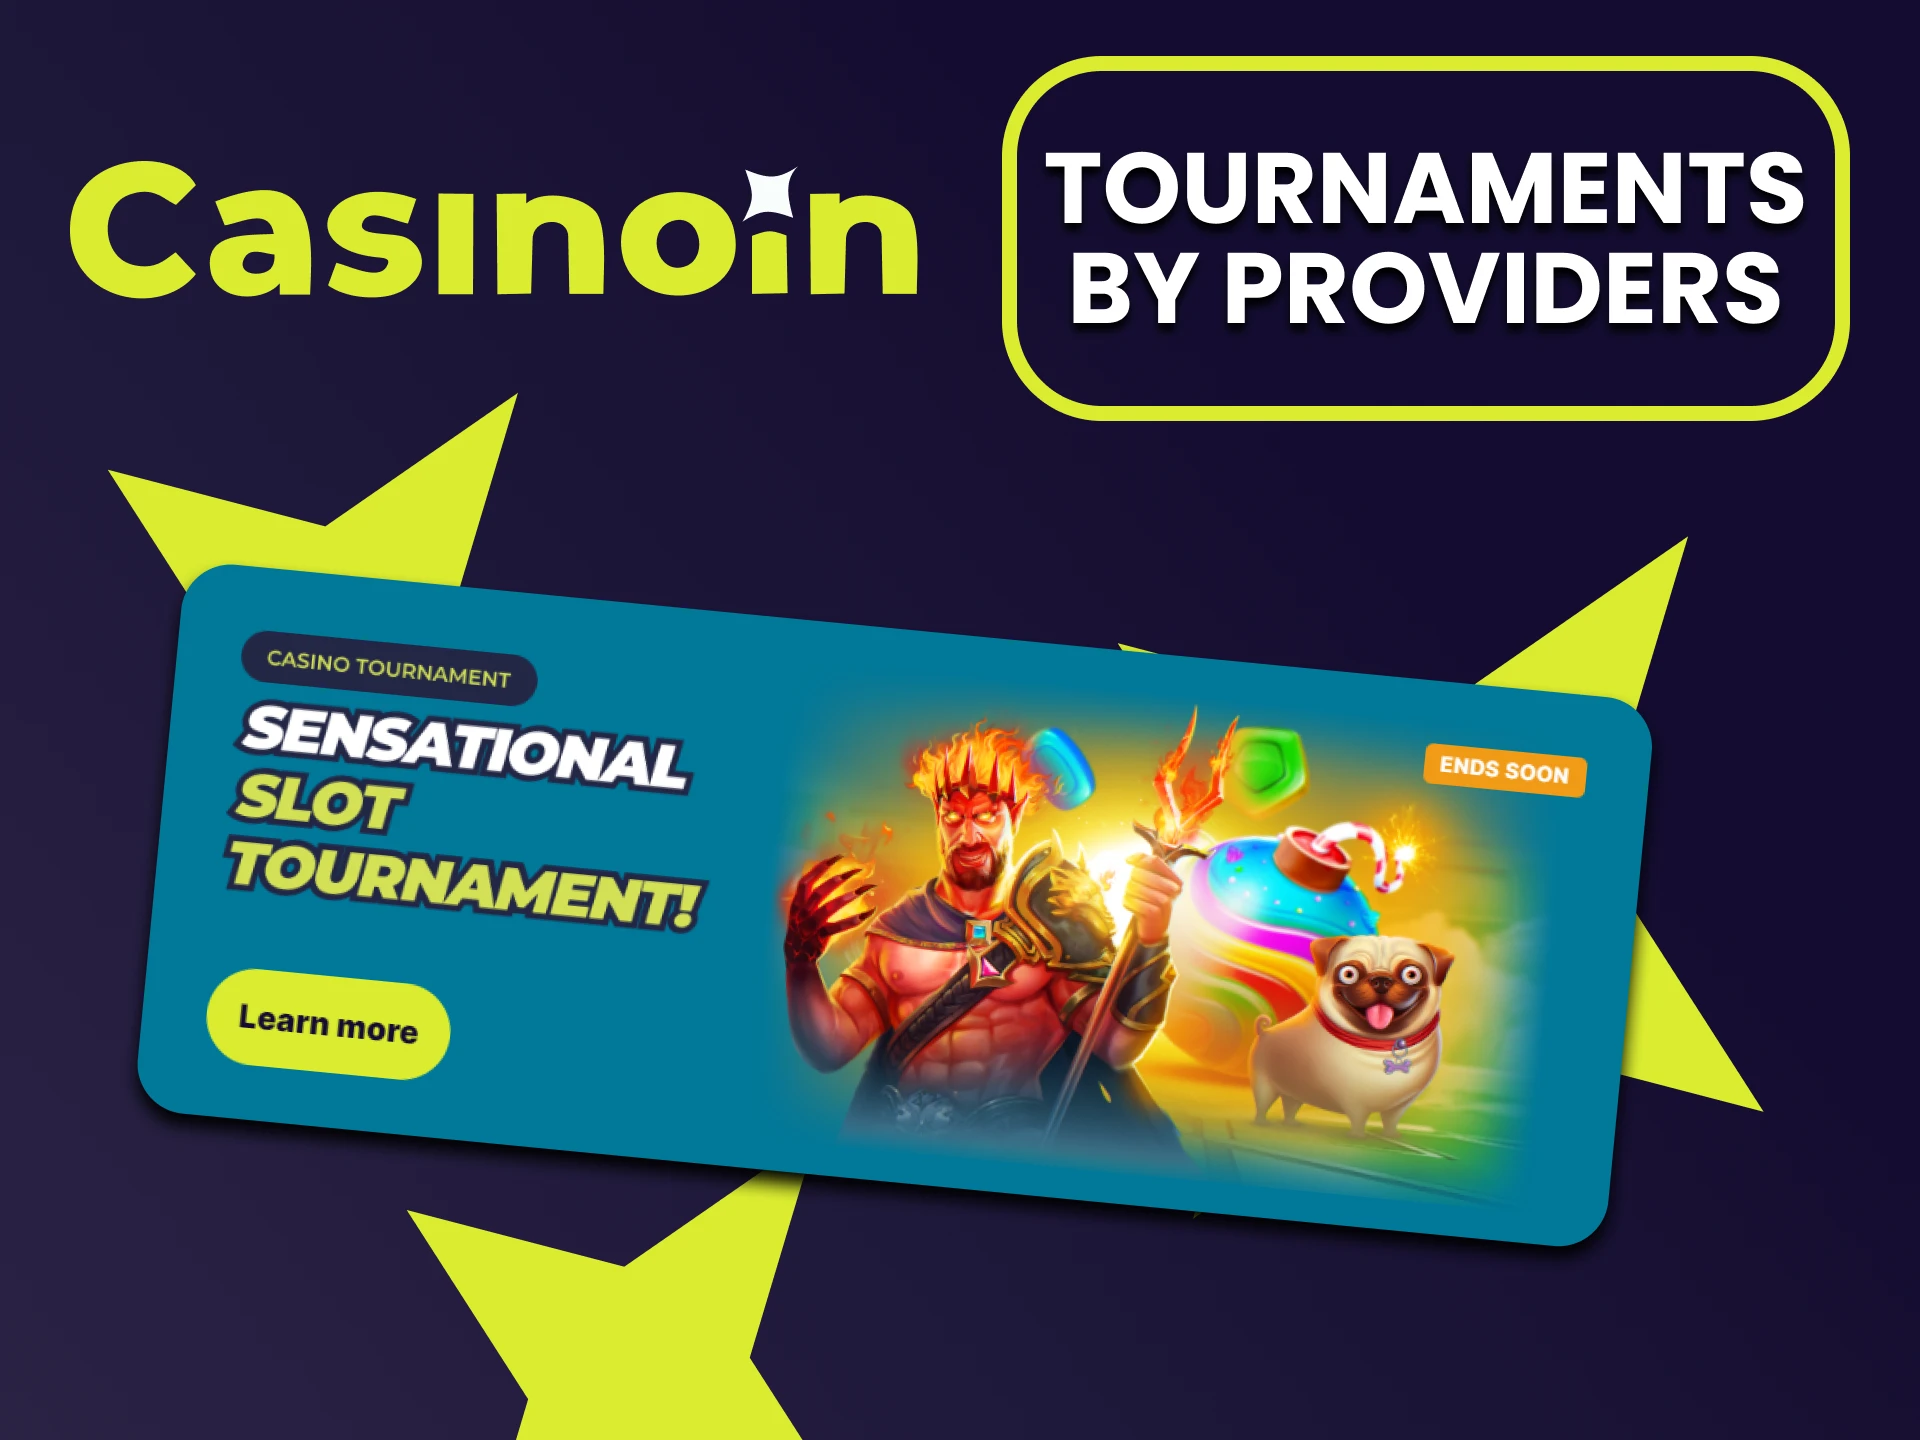 Casinoin gives bonuses for tournaments.